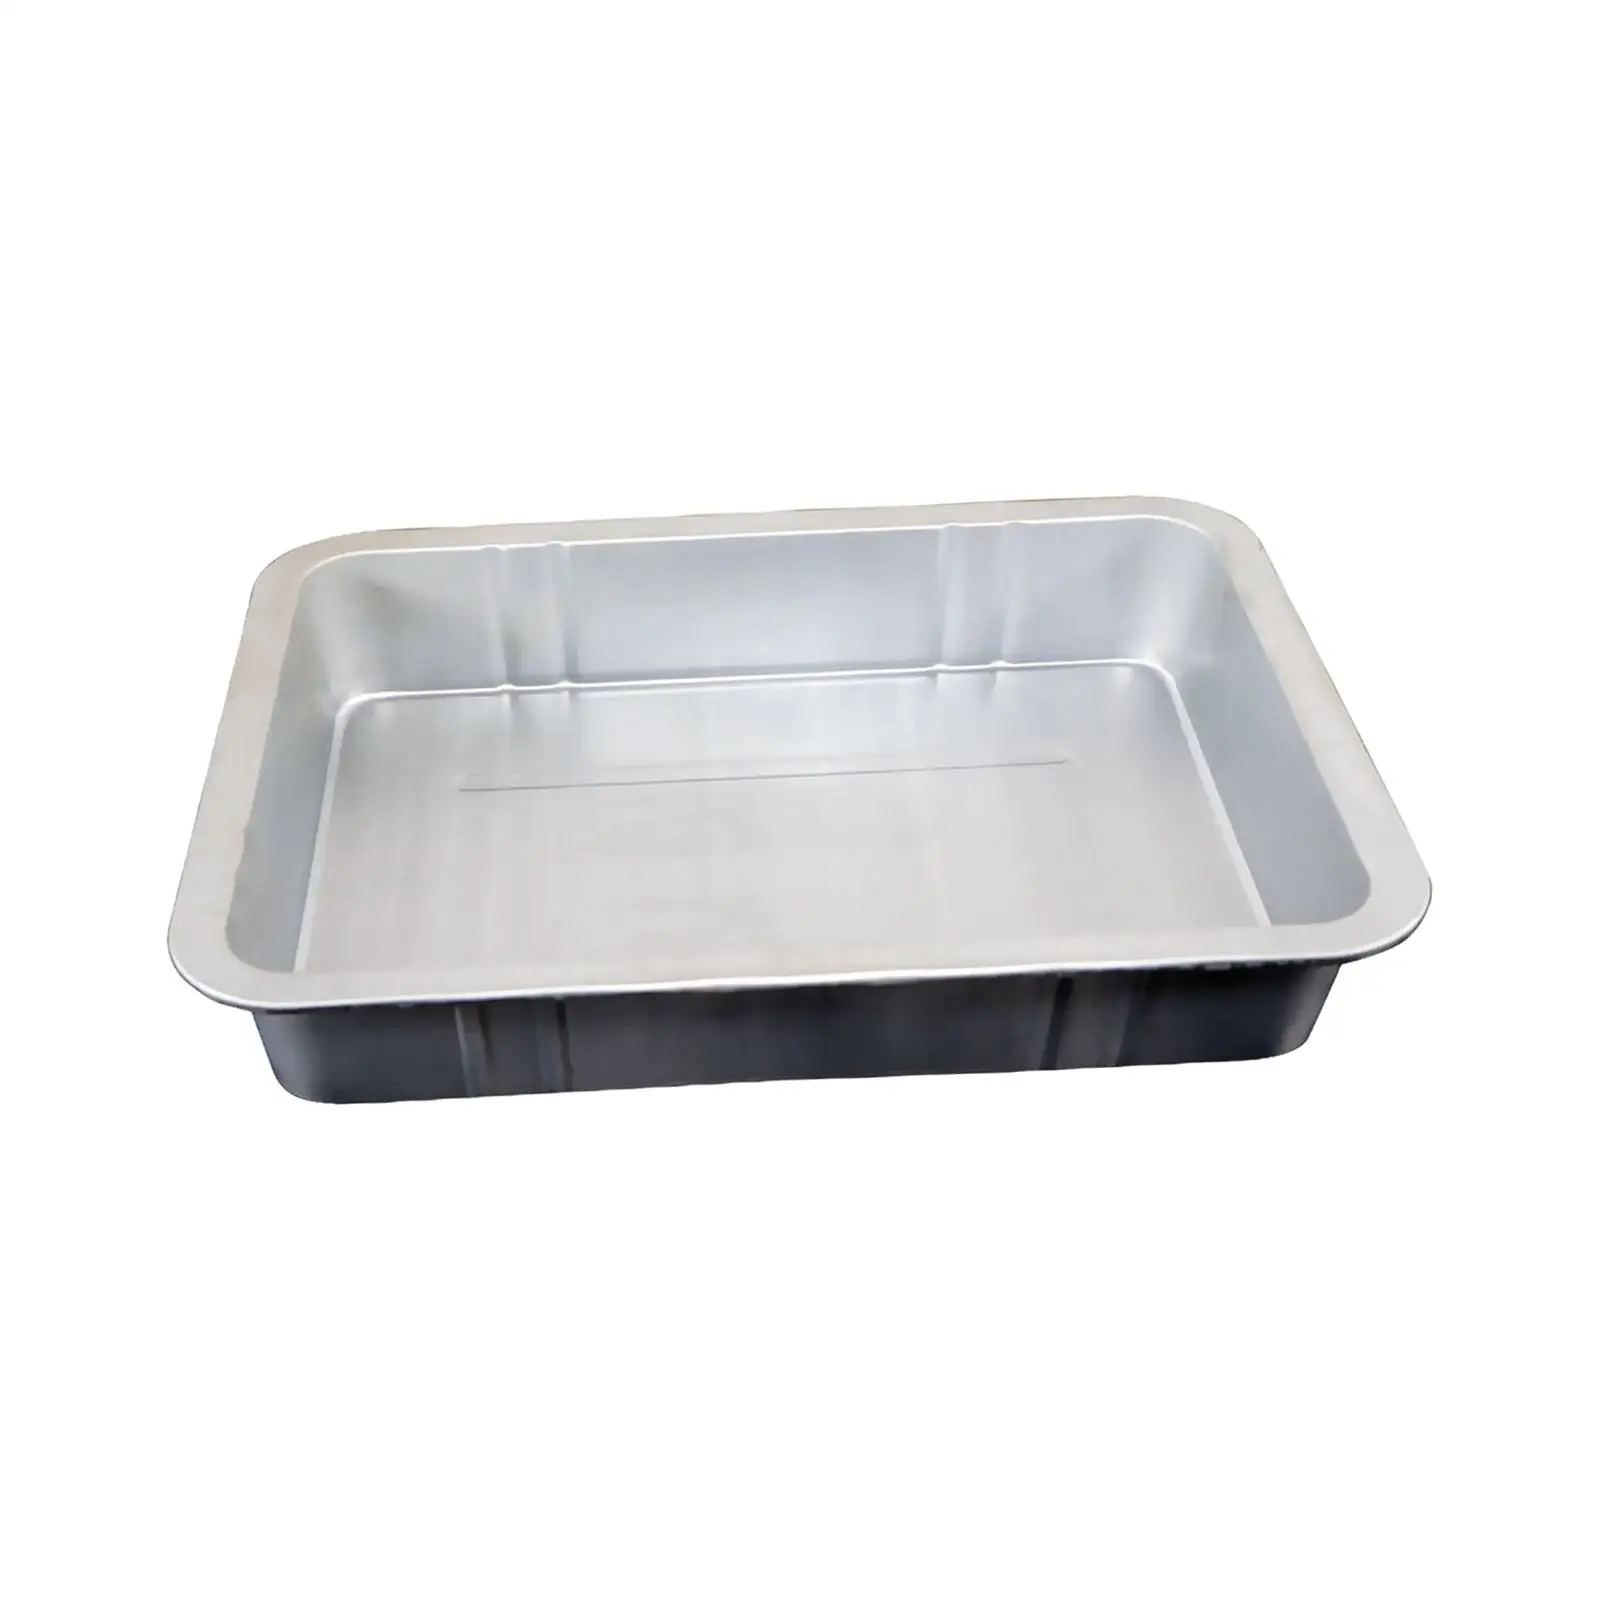 Oil Drain Pan Large Capacity Prevents Spills Easy to Clean Sturdy Oil Drain Container for Motorbikes Auto Truck Supplies